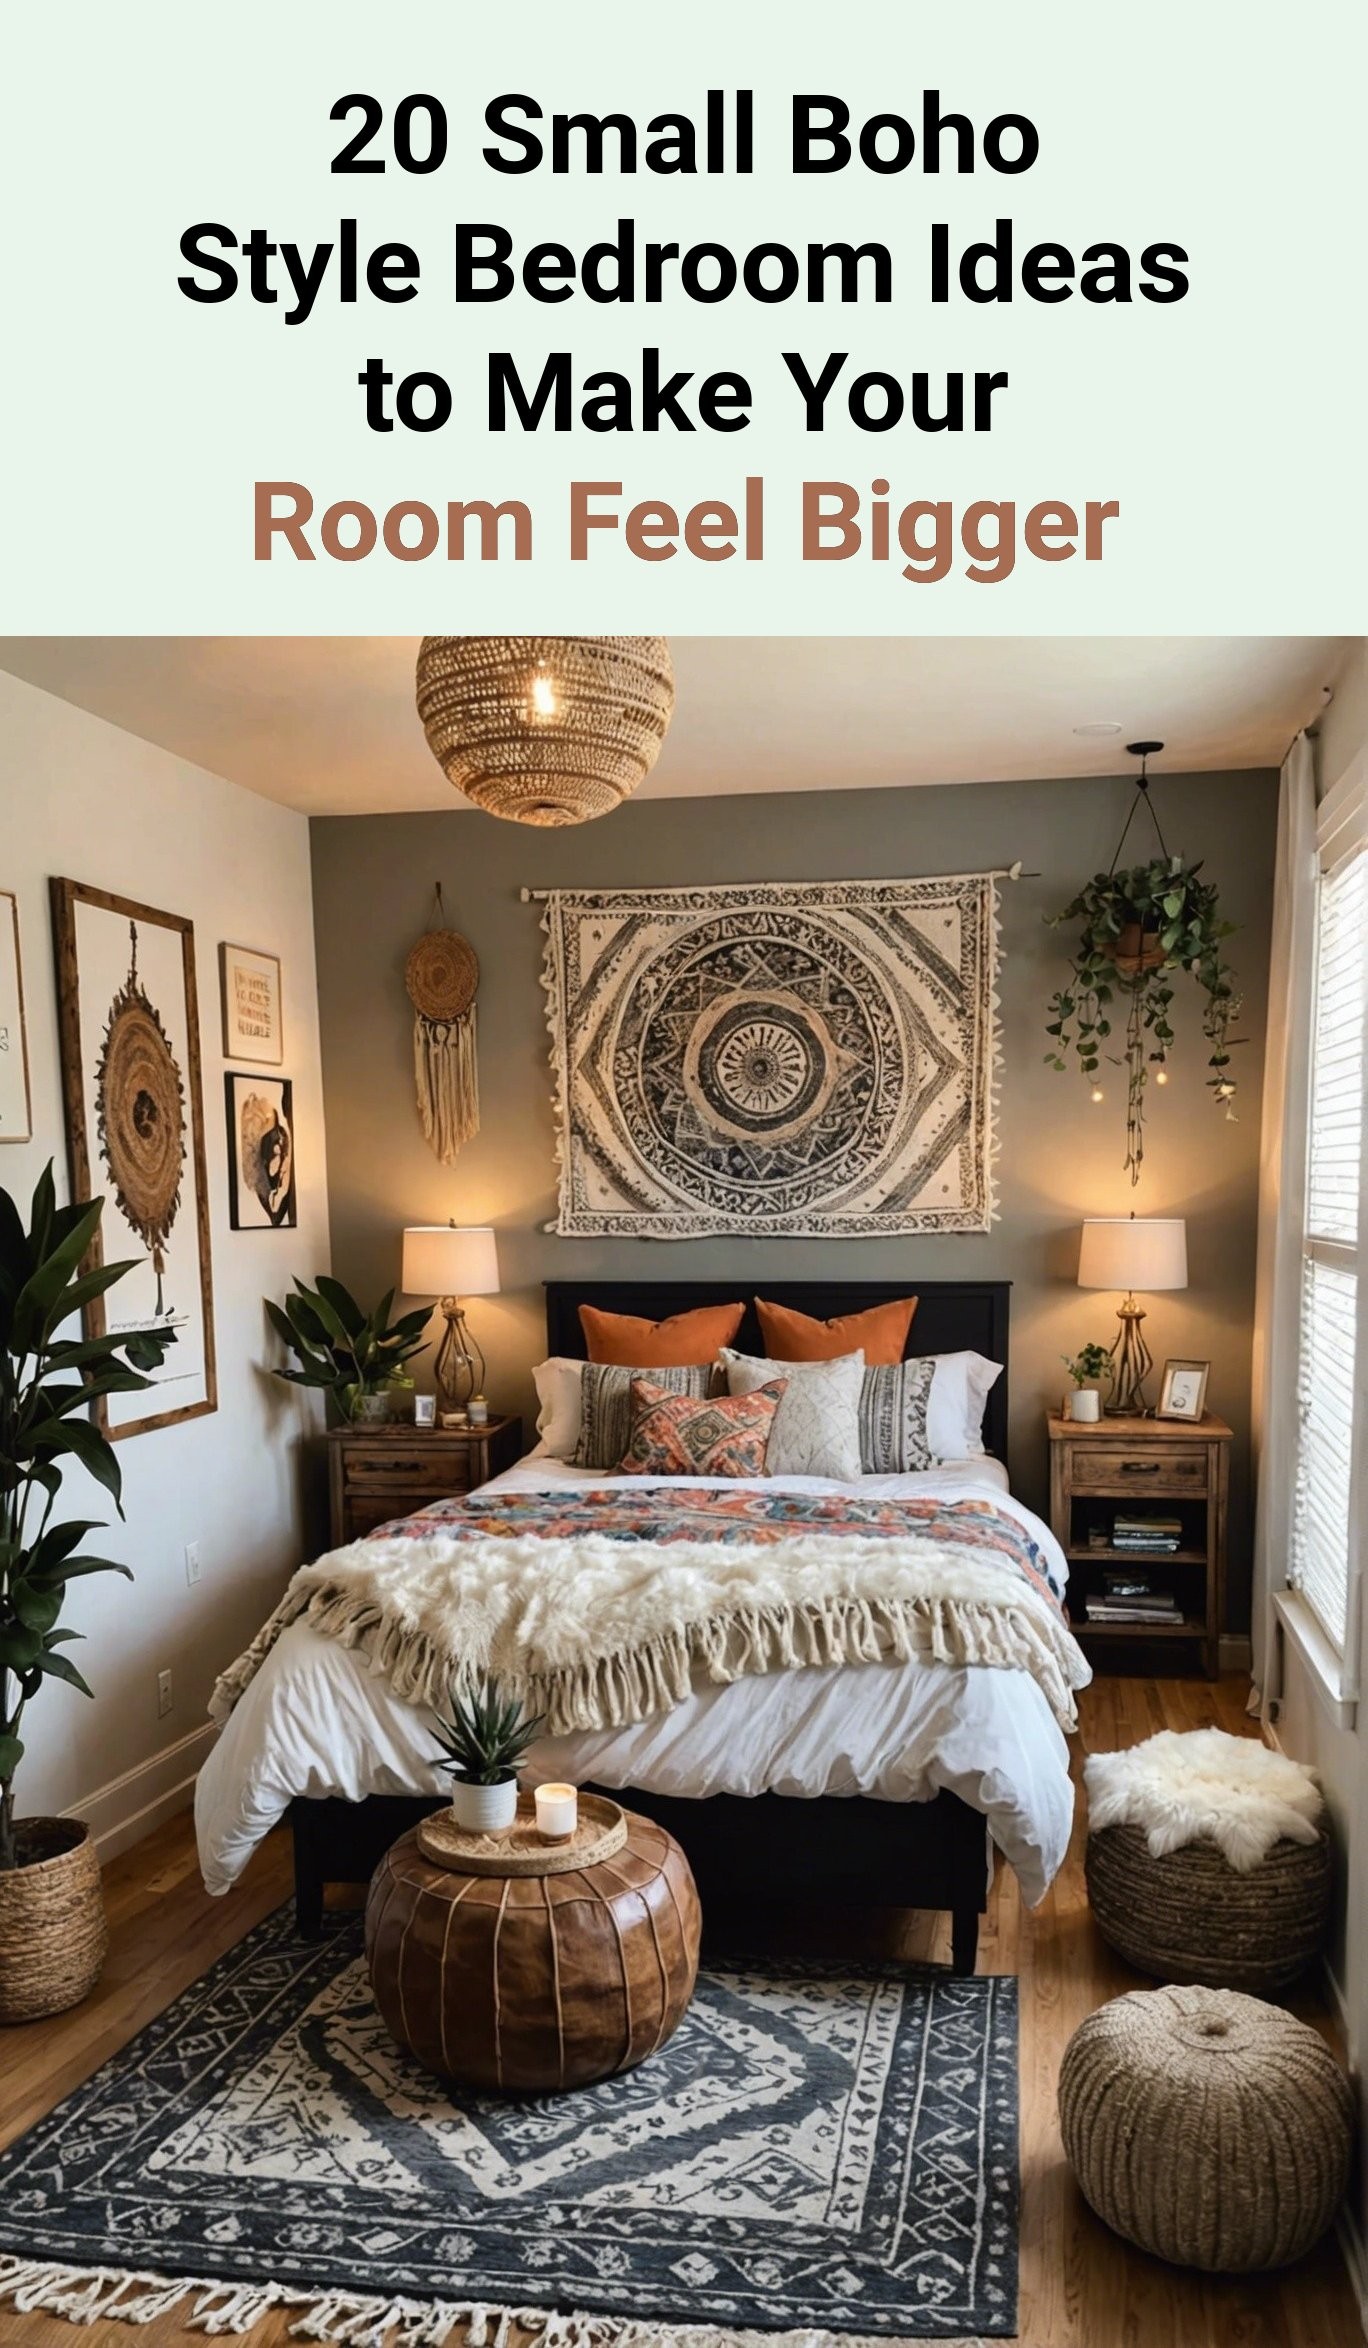 20 Small Boho Style Bedroom Ideas to Make Your Room Feel Bigger